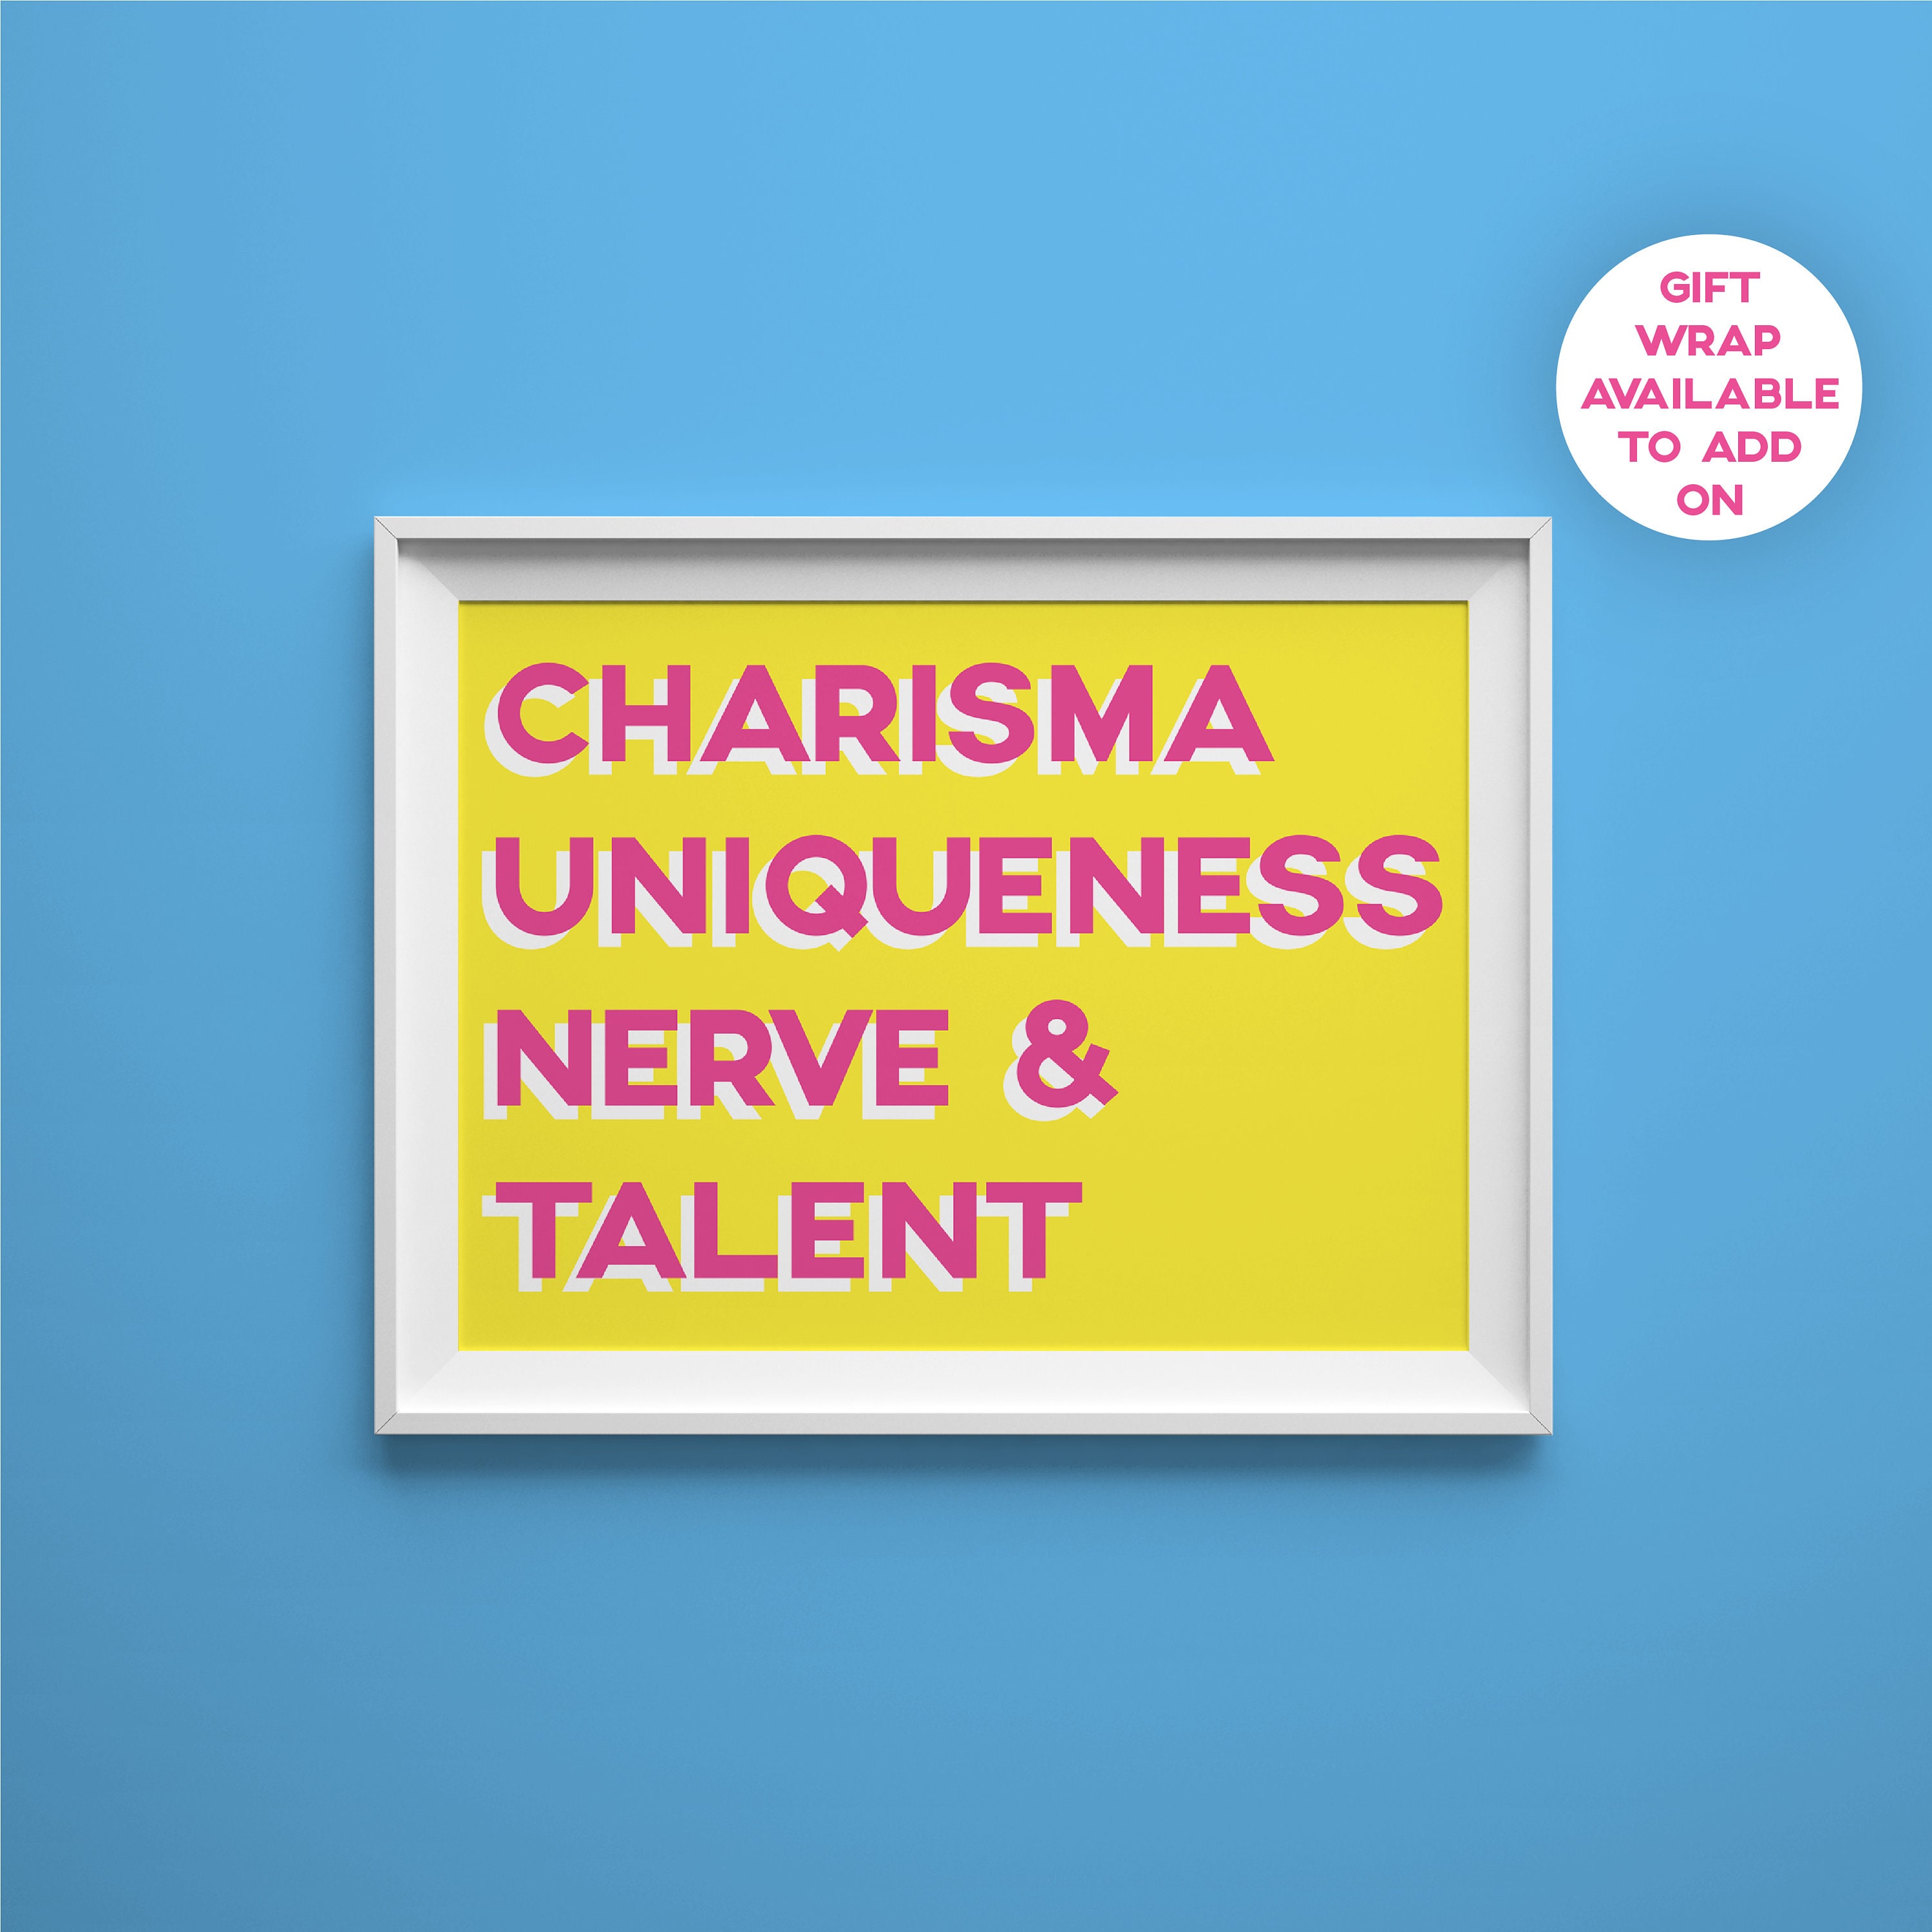 NEW AGILITY And CHARISMA TALENTS